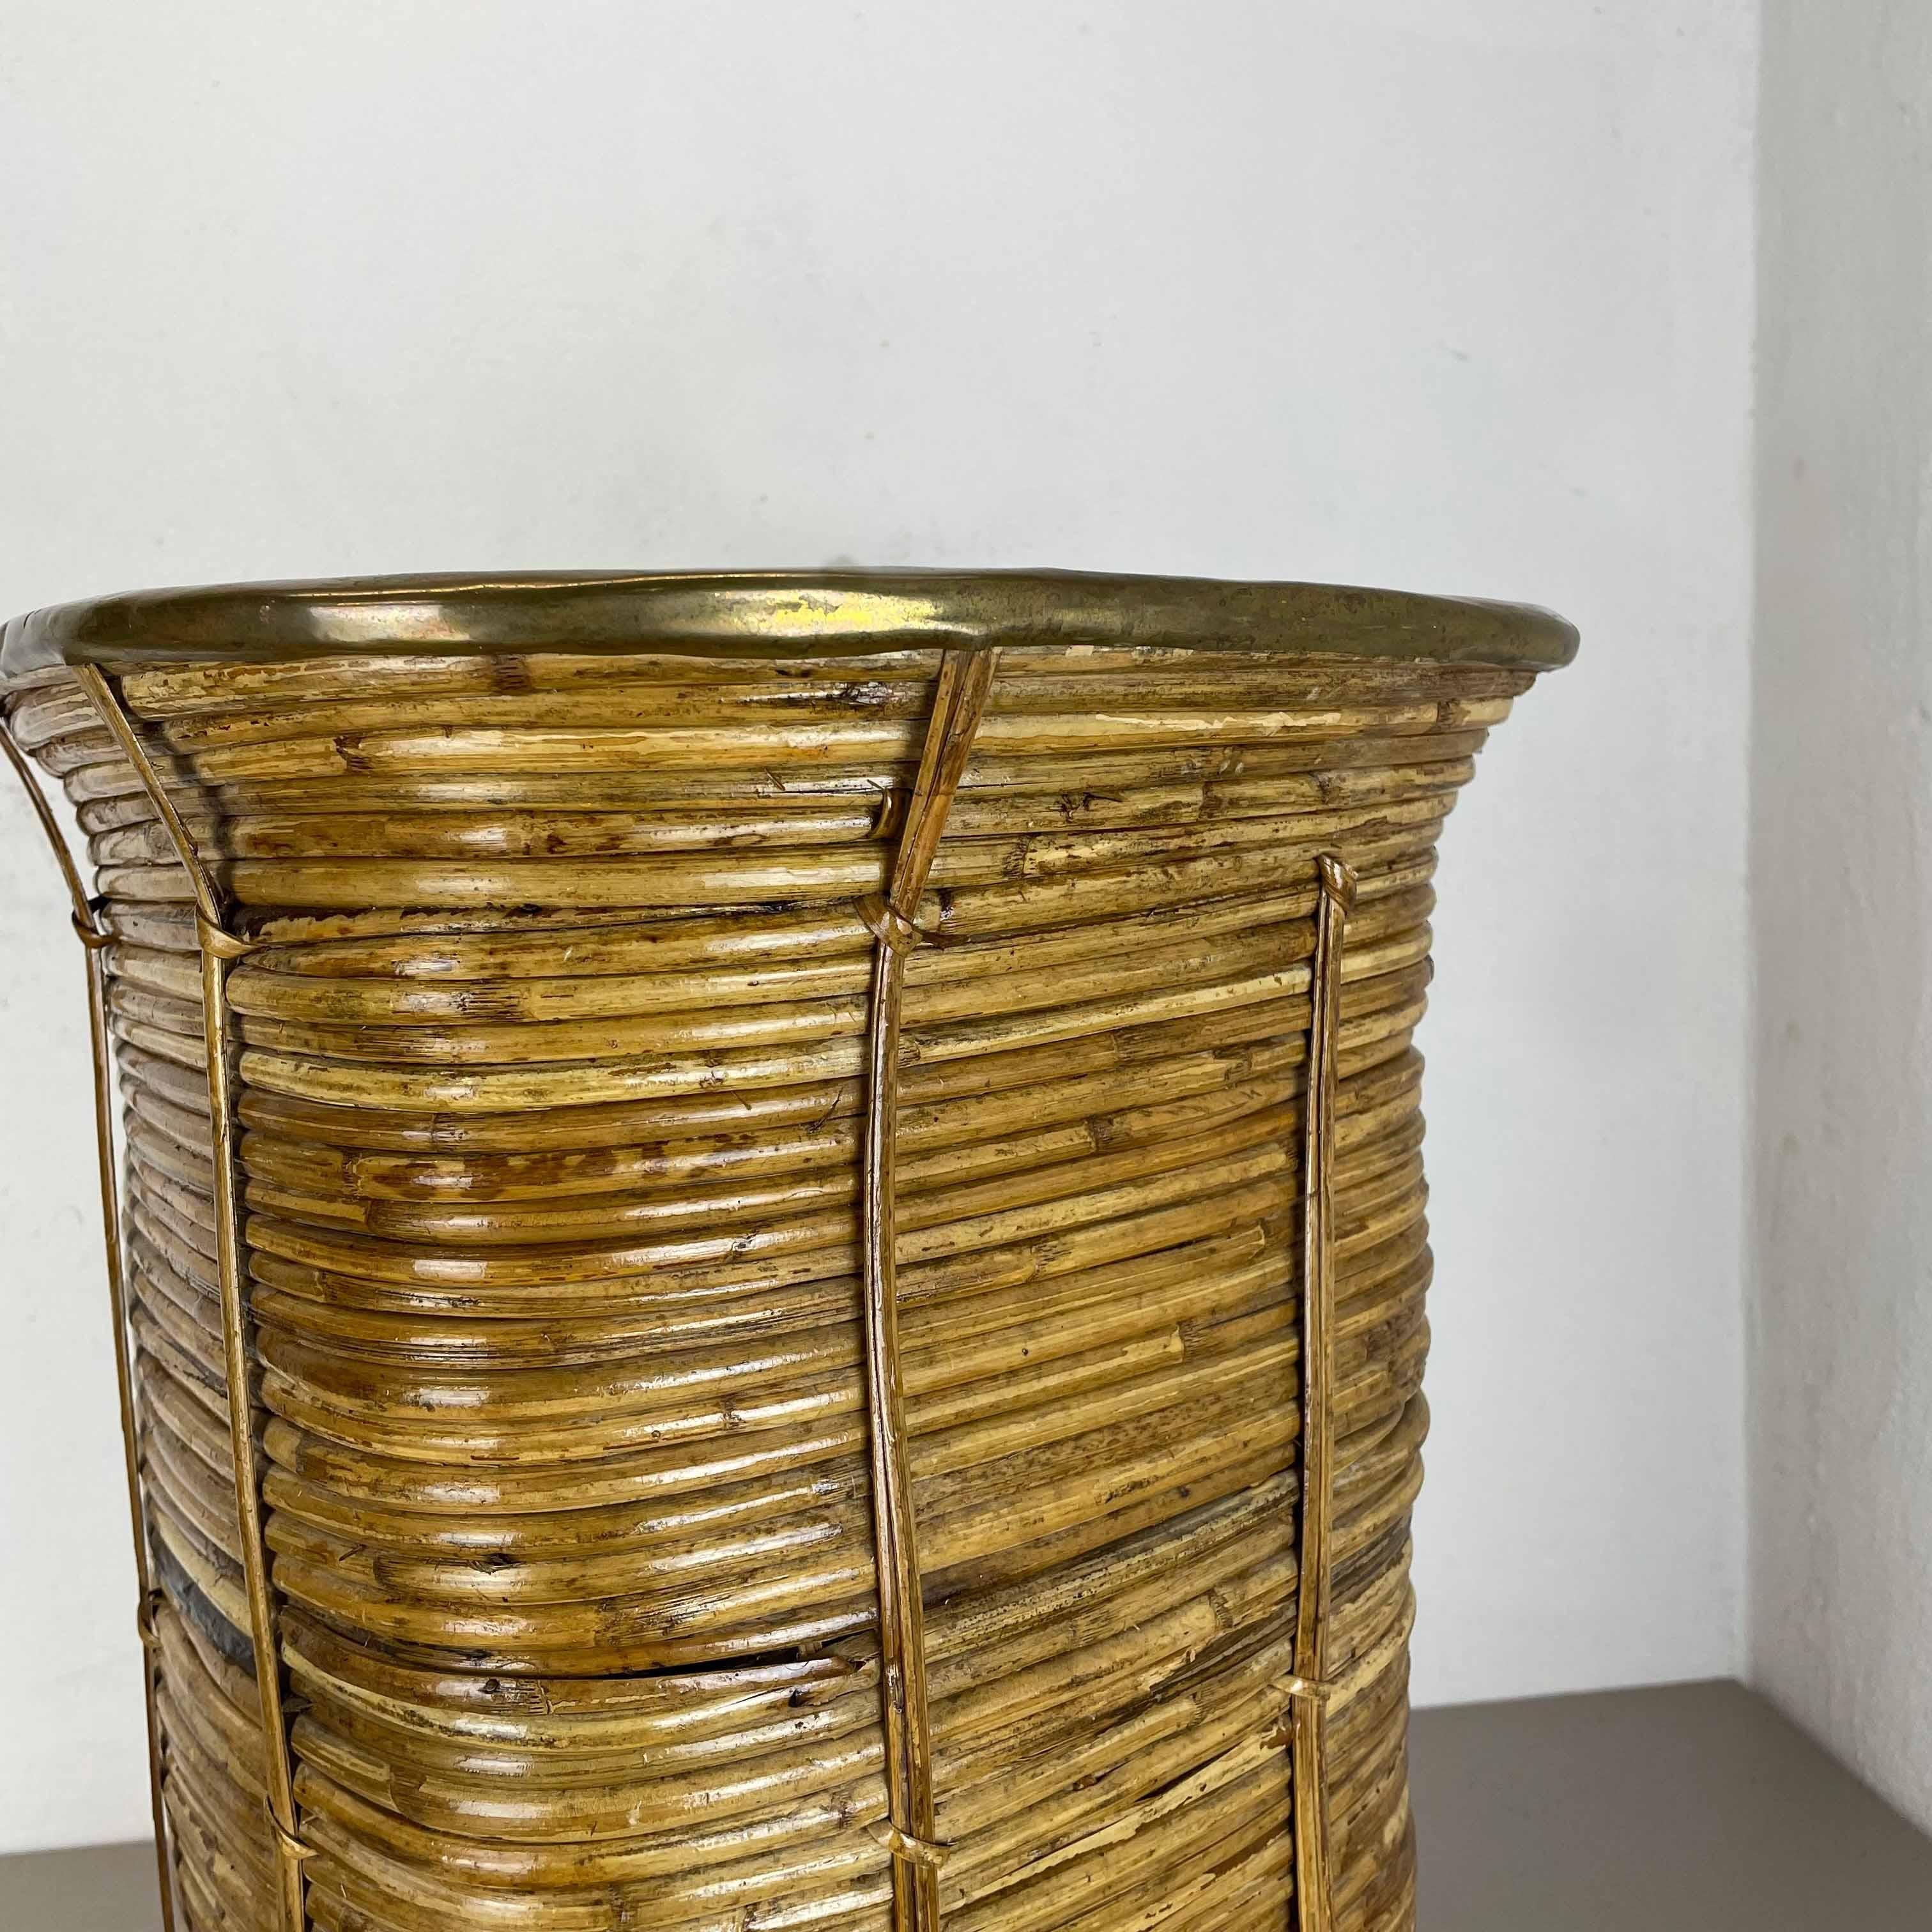 Aubock Style Rattan and Brass Bauhaus Waste Bin, Umbrella Stand, France, 1960s For Sale 1